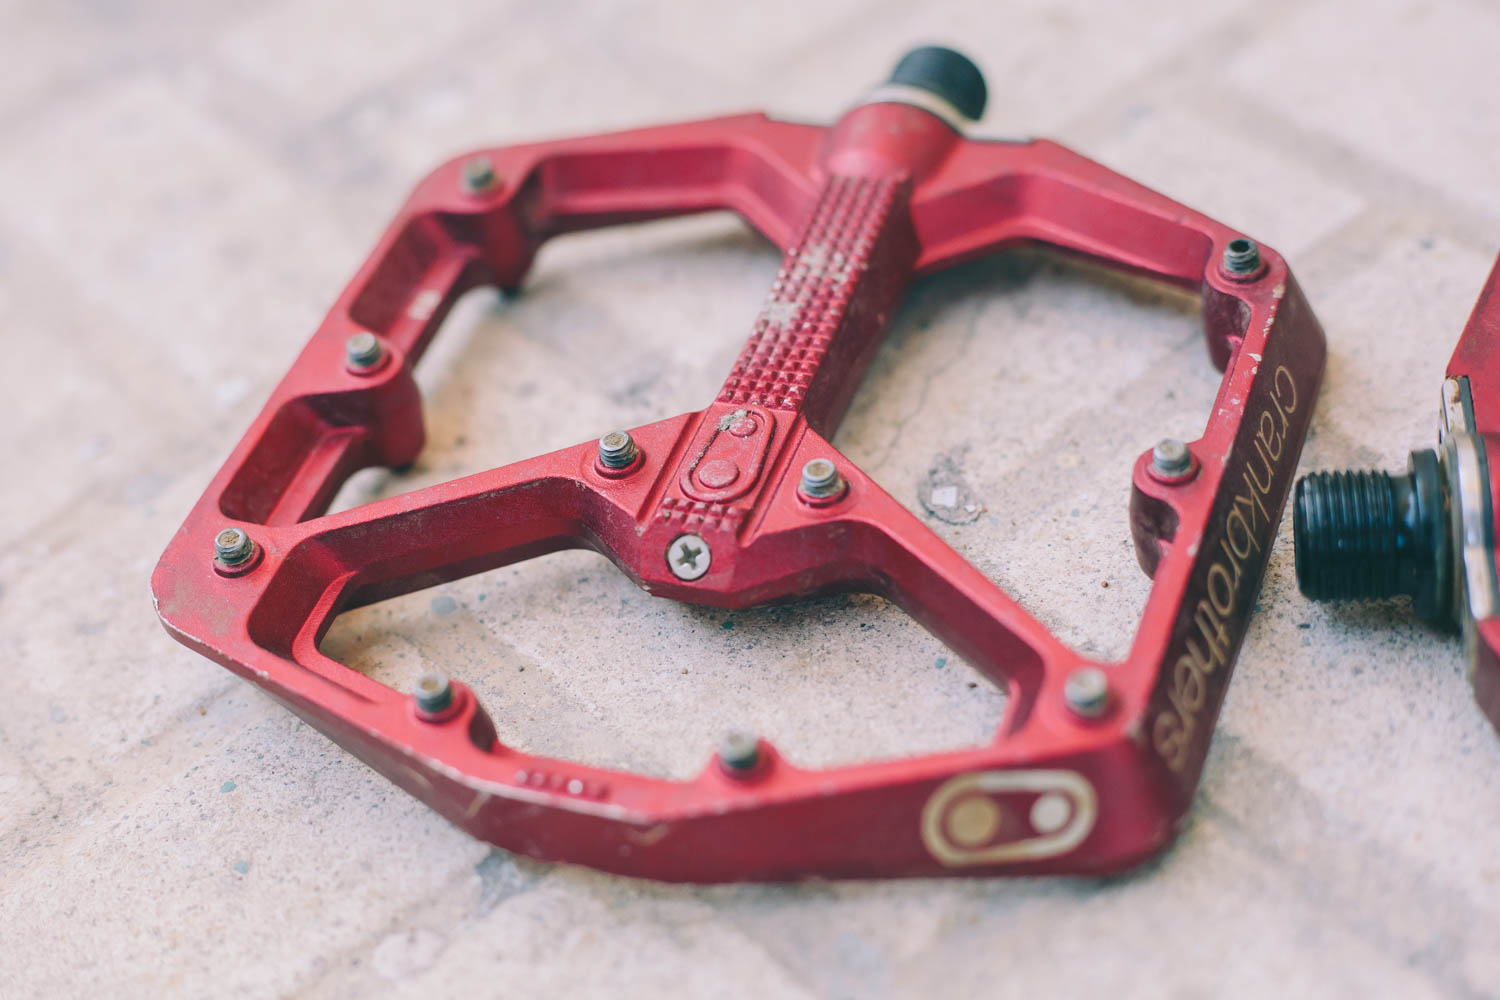 crank brothers stamp 2 flat pedals